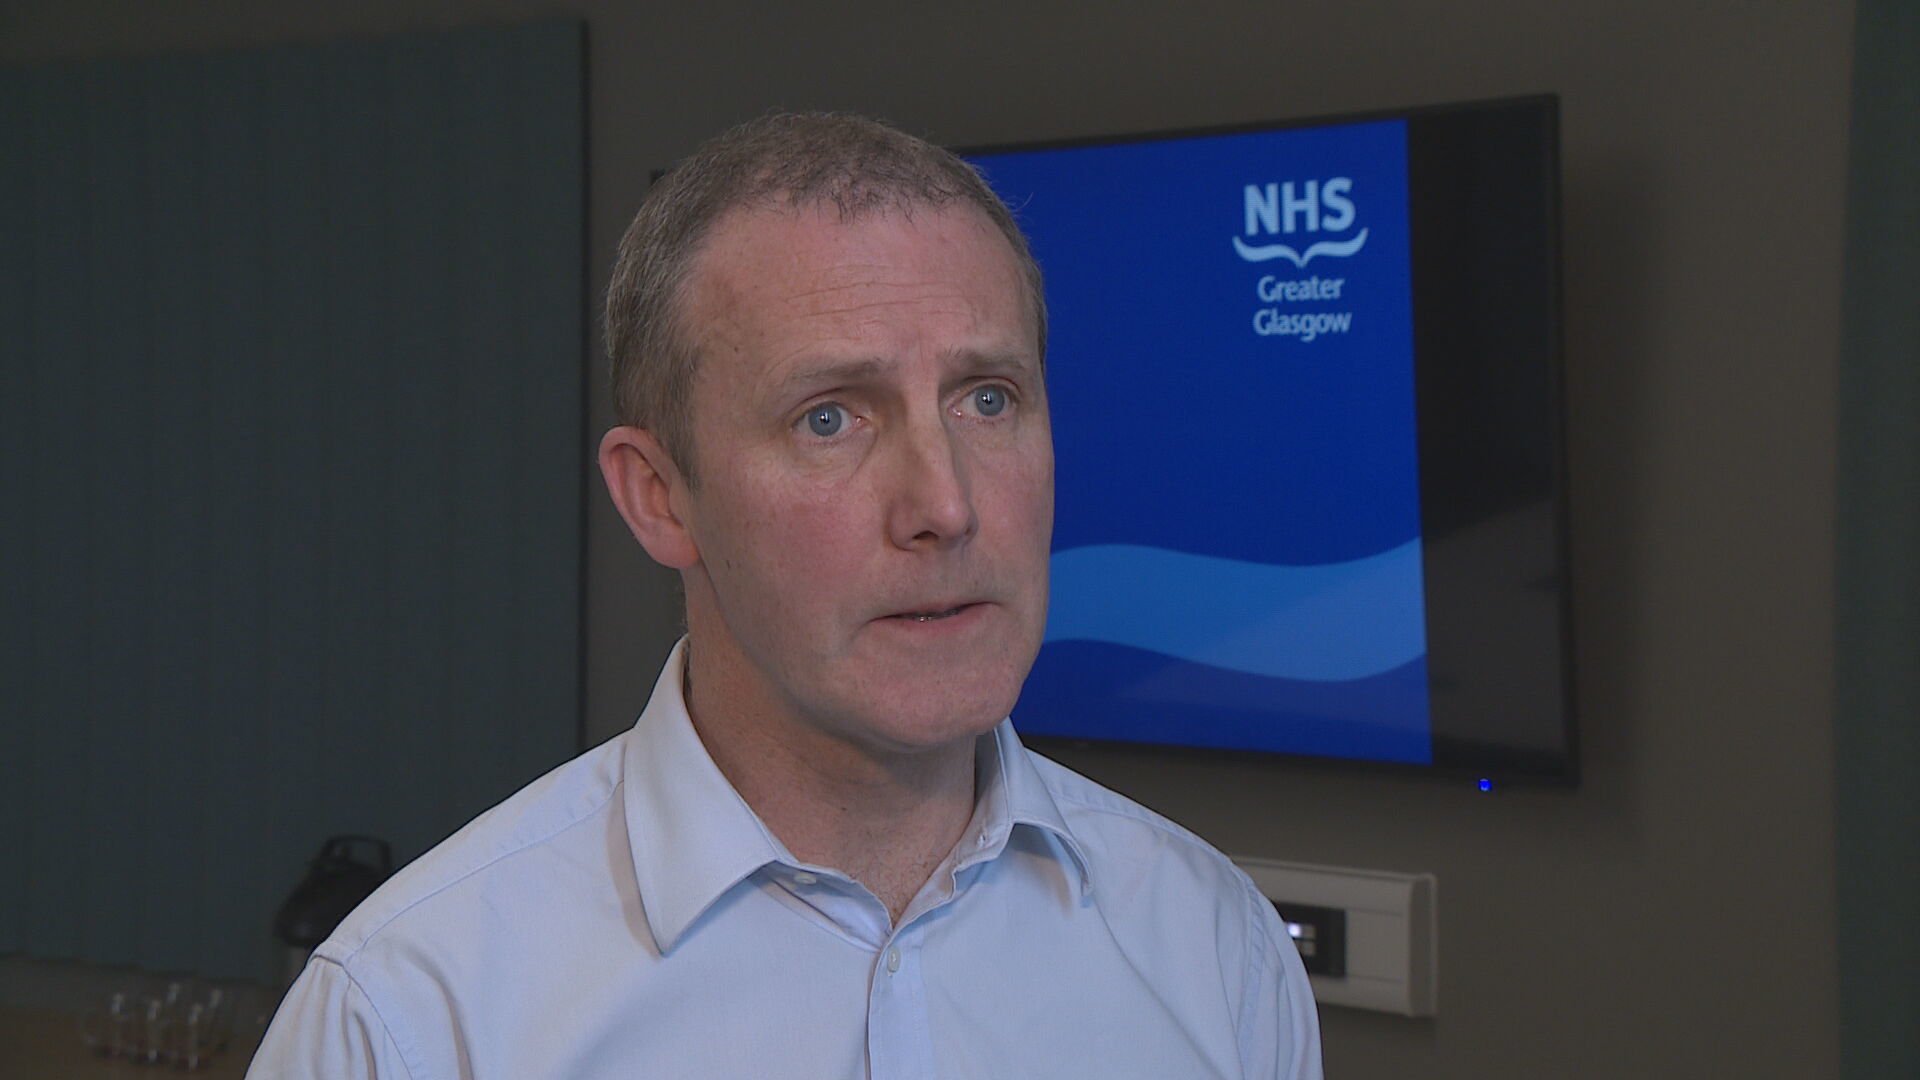 Health secretary Michael Matheson accepted the roaming charge was his fault.